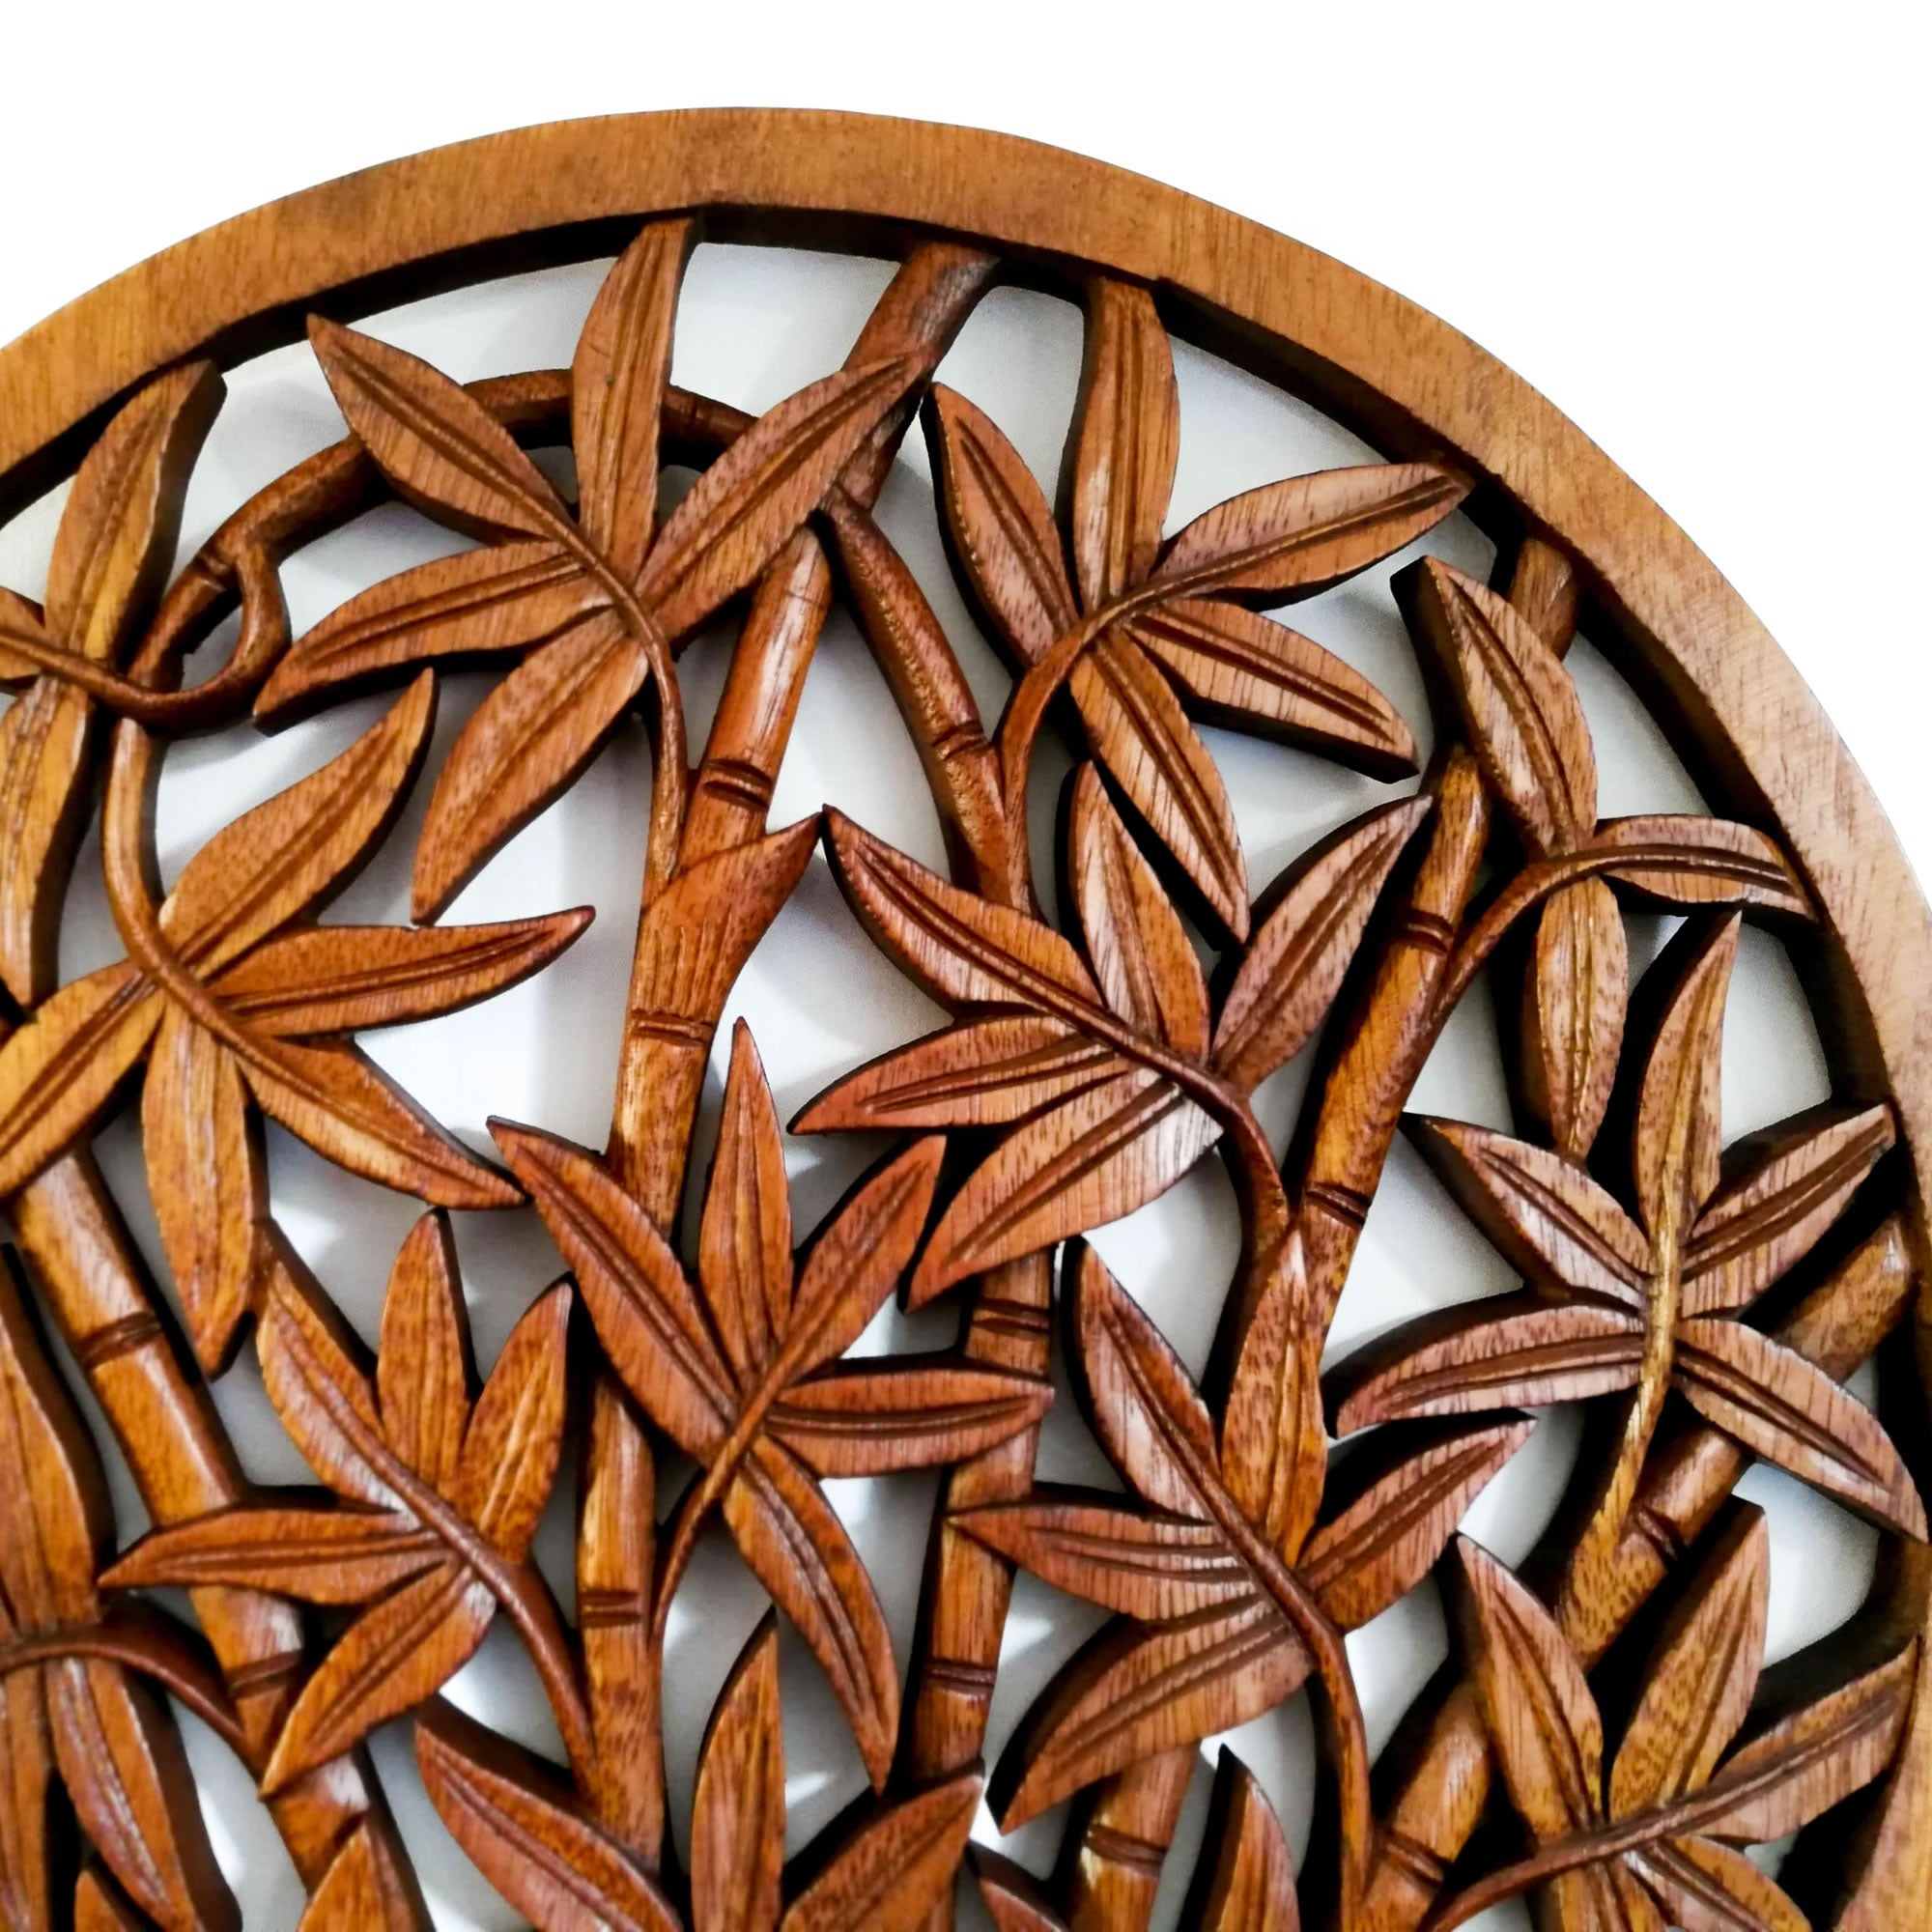 Hand Carved Wooden Decorative Wall Art Round - Bamboo Shoots. A perfect gift this season.  Handmade using teak wood.